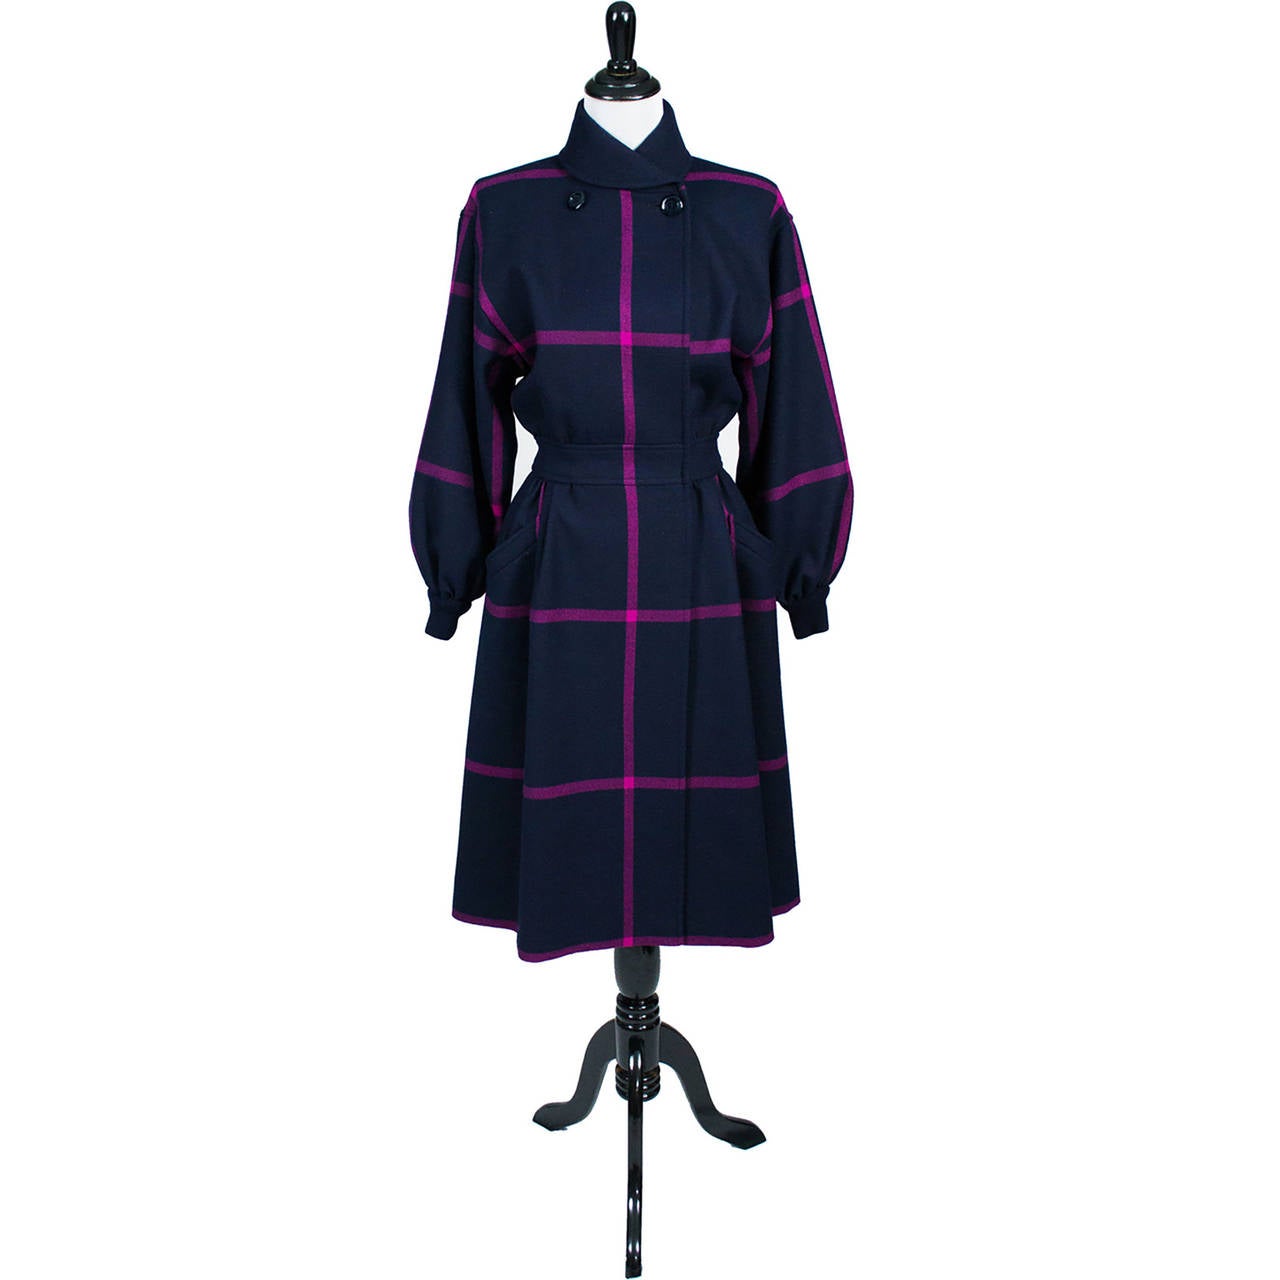 This beautiful plaid wool Valentino Boutique Vintage Coat or Coat Dress is in mint condition! This piece comes from the estate of a woman who bought almost exclusively Valentino and Yves Saint Laurent from the 1960's through the early 1980s. The